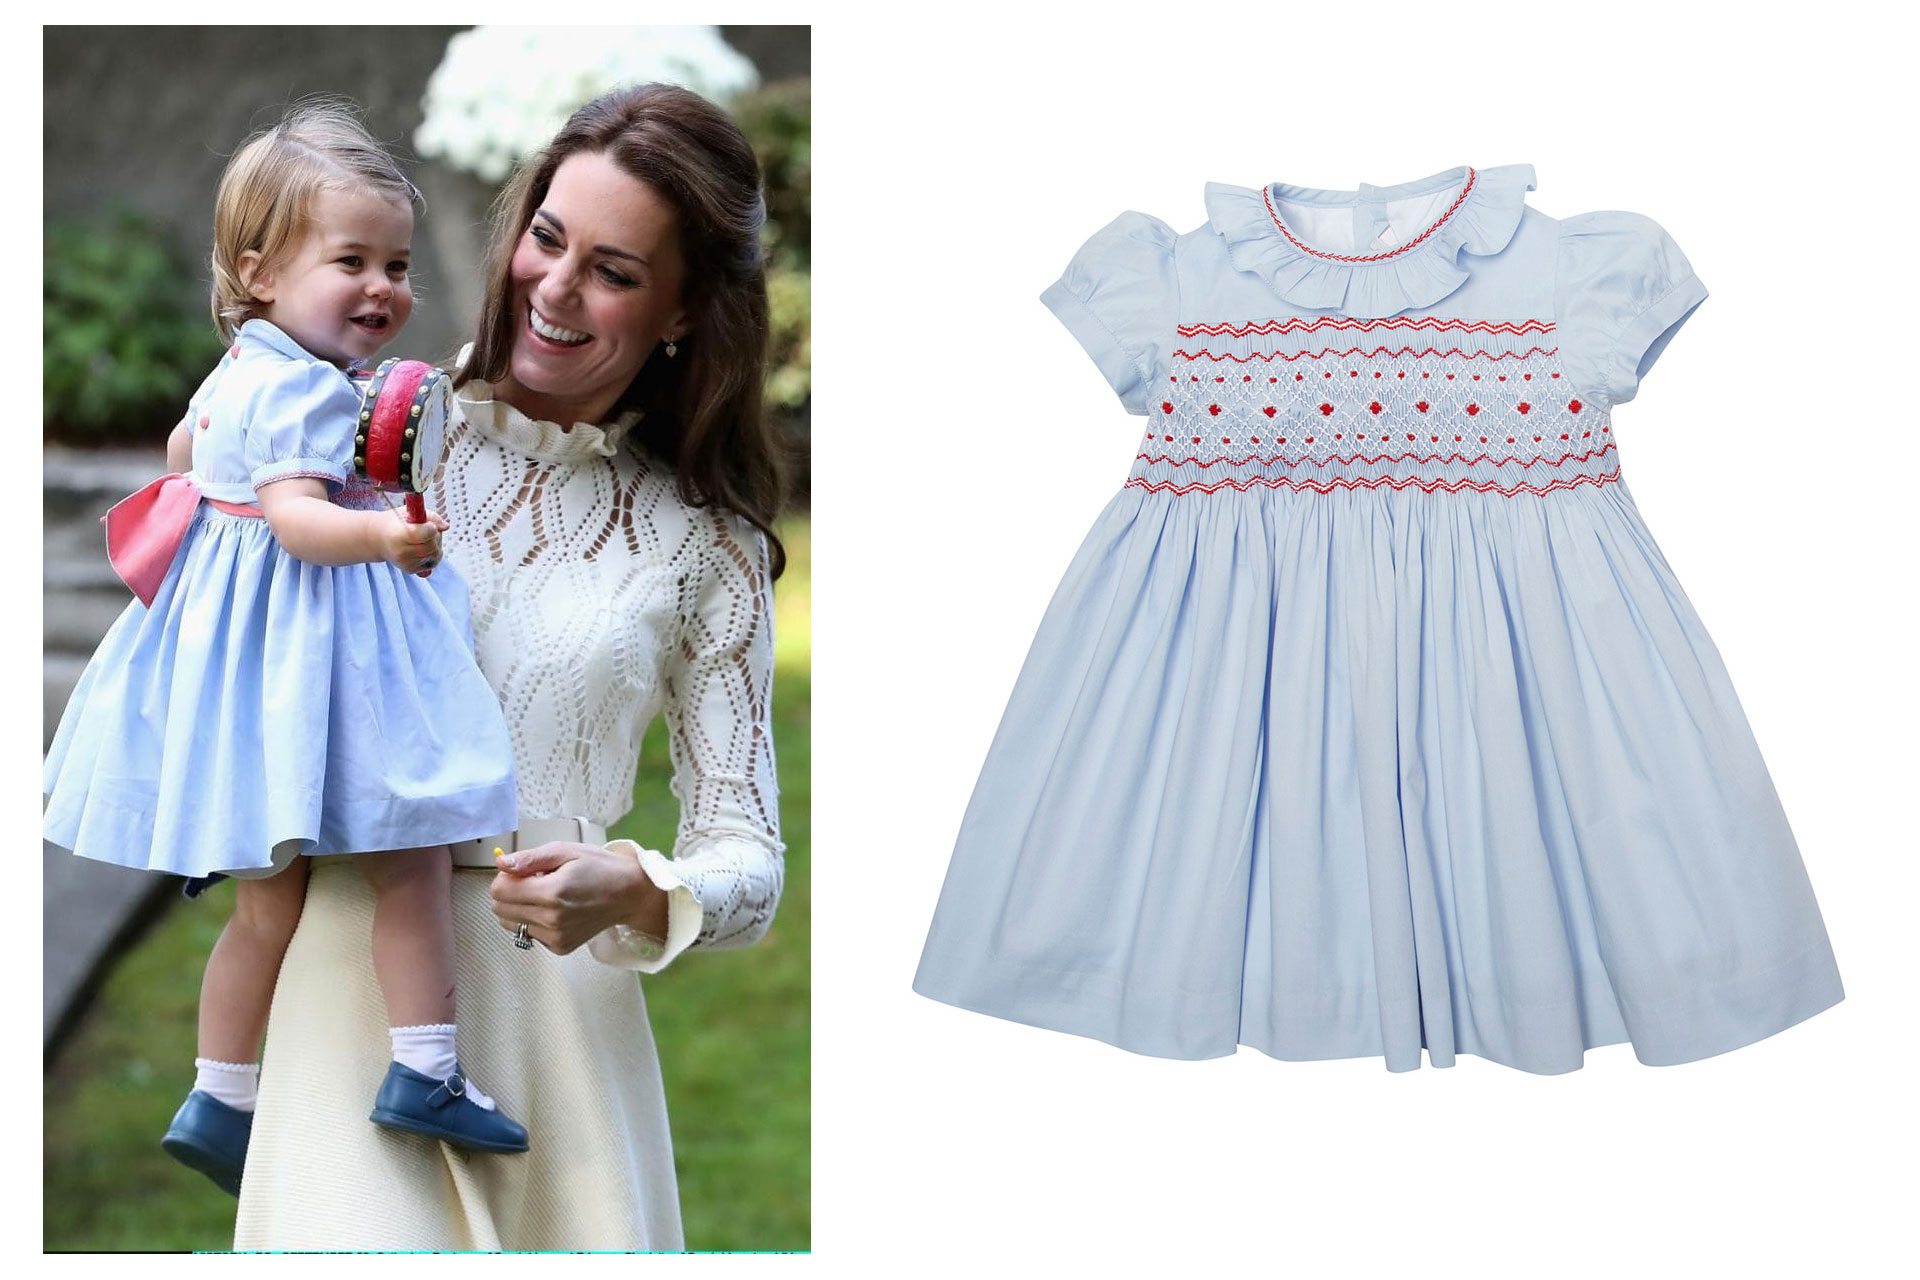 Kids' Style: What the Royal Children Wear | Royal Children Outfits